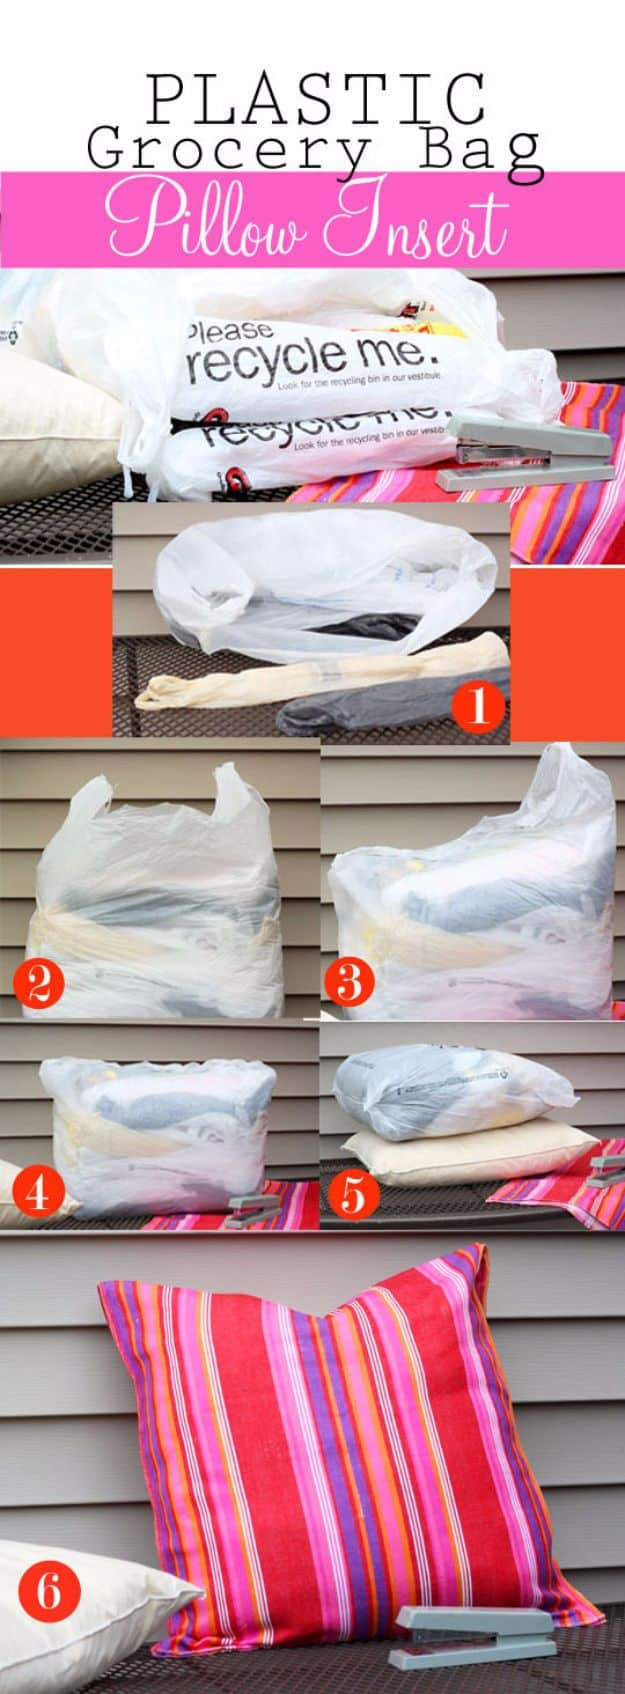 DIY Ideas With Plastic Bags - Plastic Grocery Bag Pillow Insert - How To Make Fun Upcycling Ideas and Crafts - Awesome Storage Projects Using Recycling - Coolest Craft Projects, Life Hacks and Ways To Upcycle a Plastic Bag #recycling #upcycling #crafts #diyideas